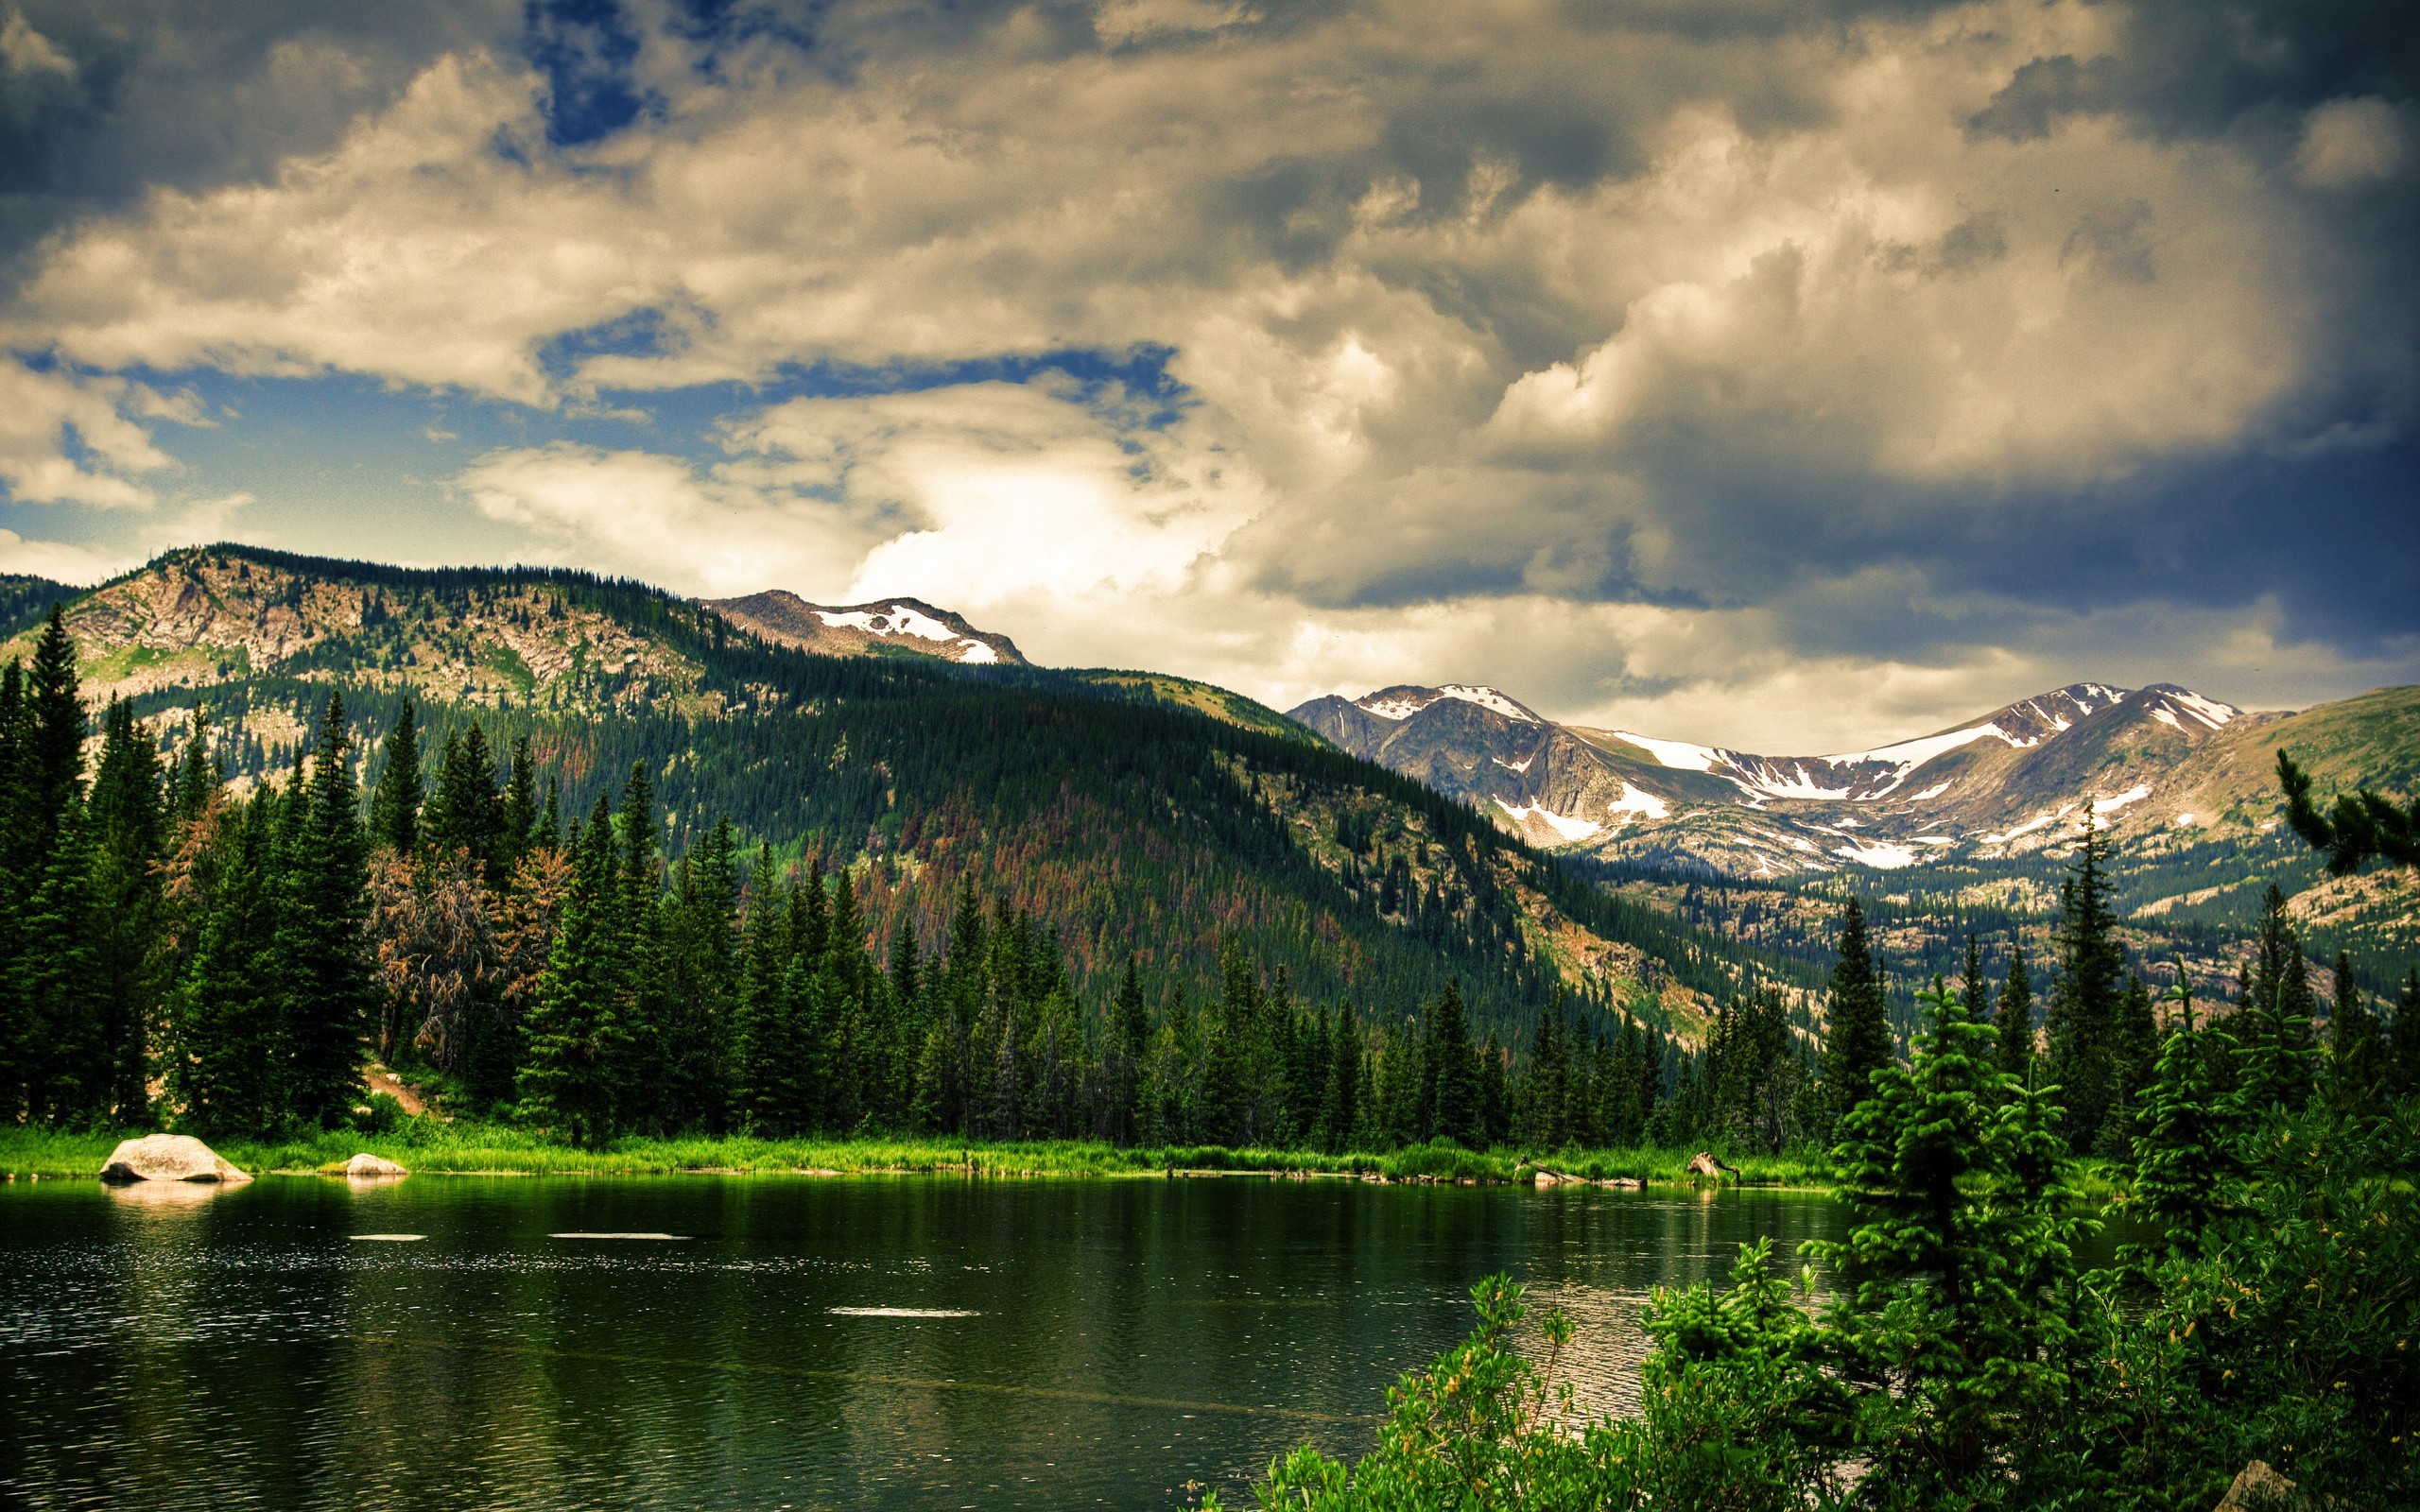 General 2560x1600 landscape nature Canada mountains water trees